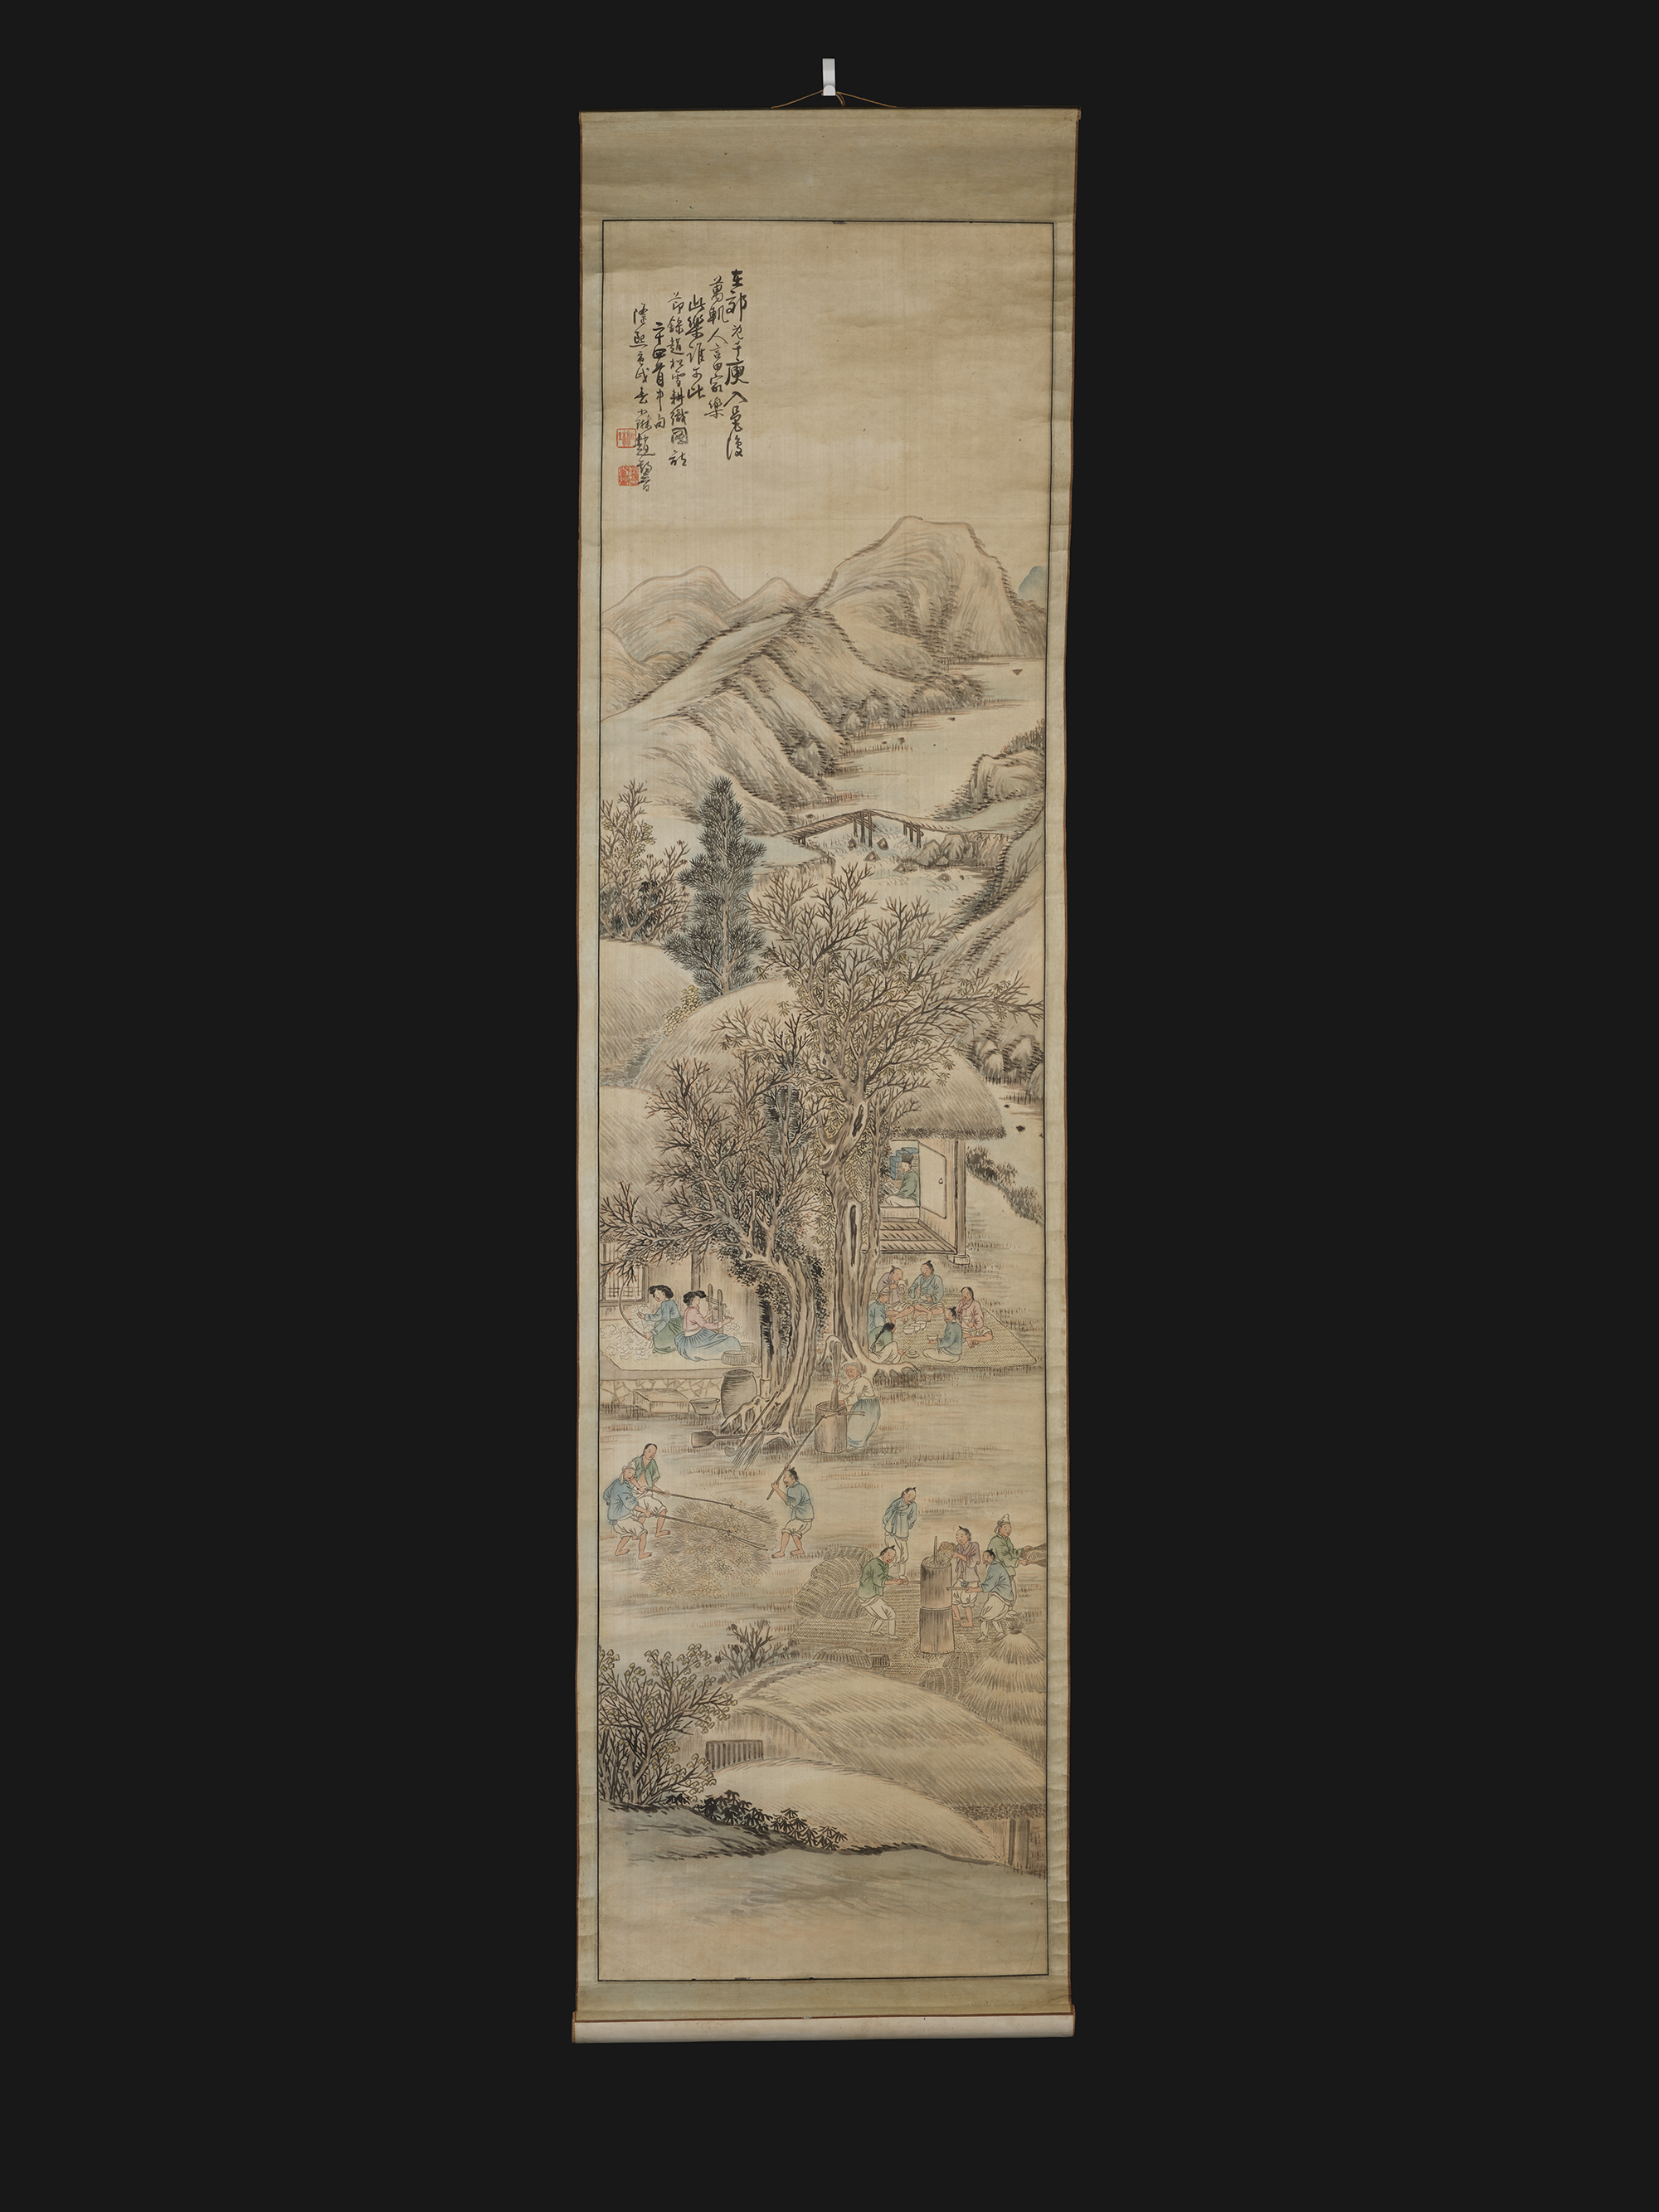 A korean scroll featuring a village scene and lots of people sat around going about their daily tasks